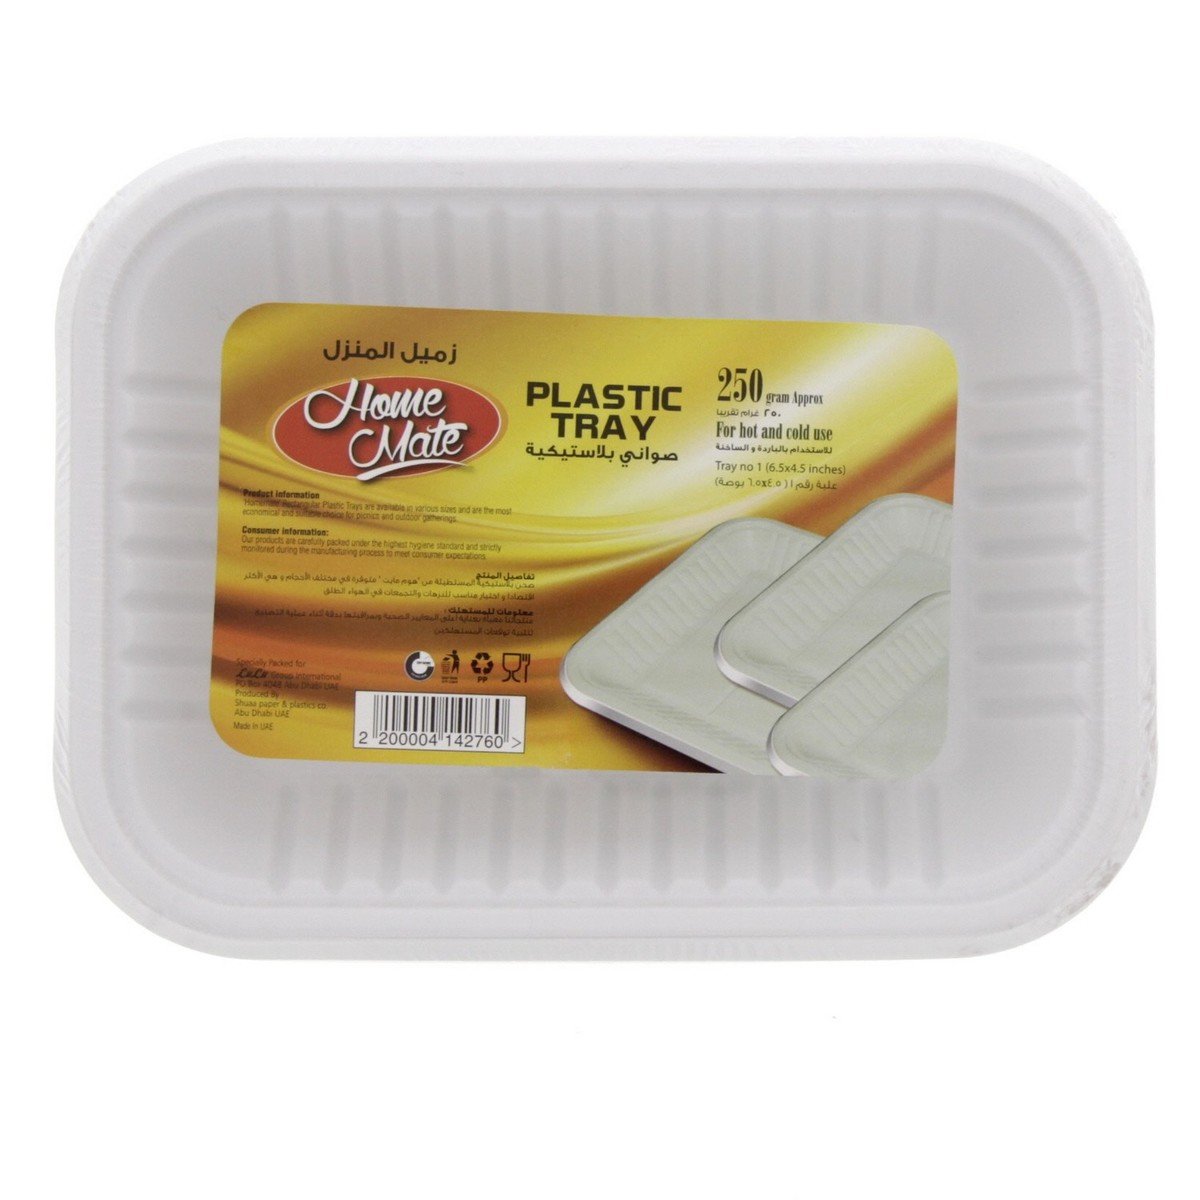 Home Mate Plastic Tray 6.5x4.5inch 250g Approx